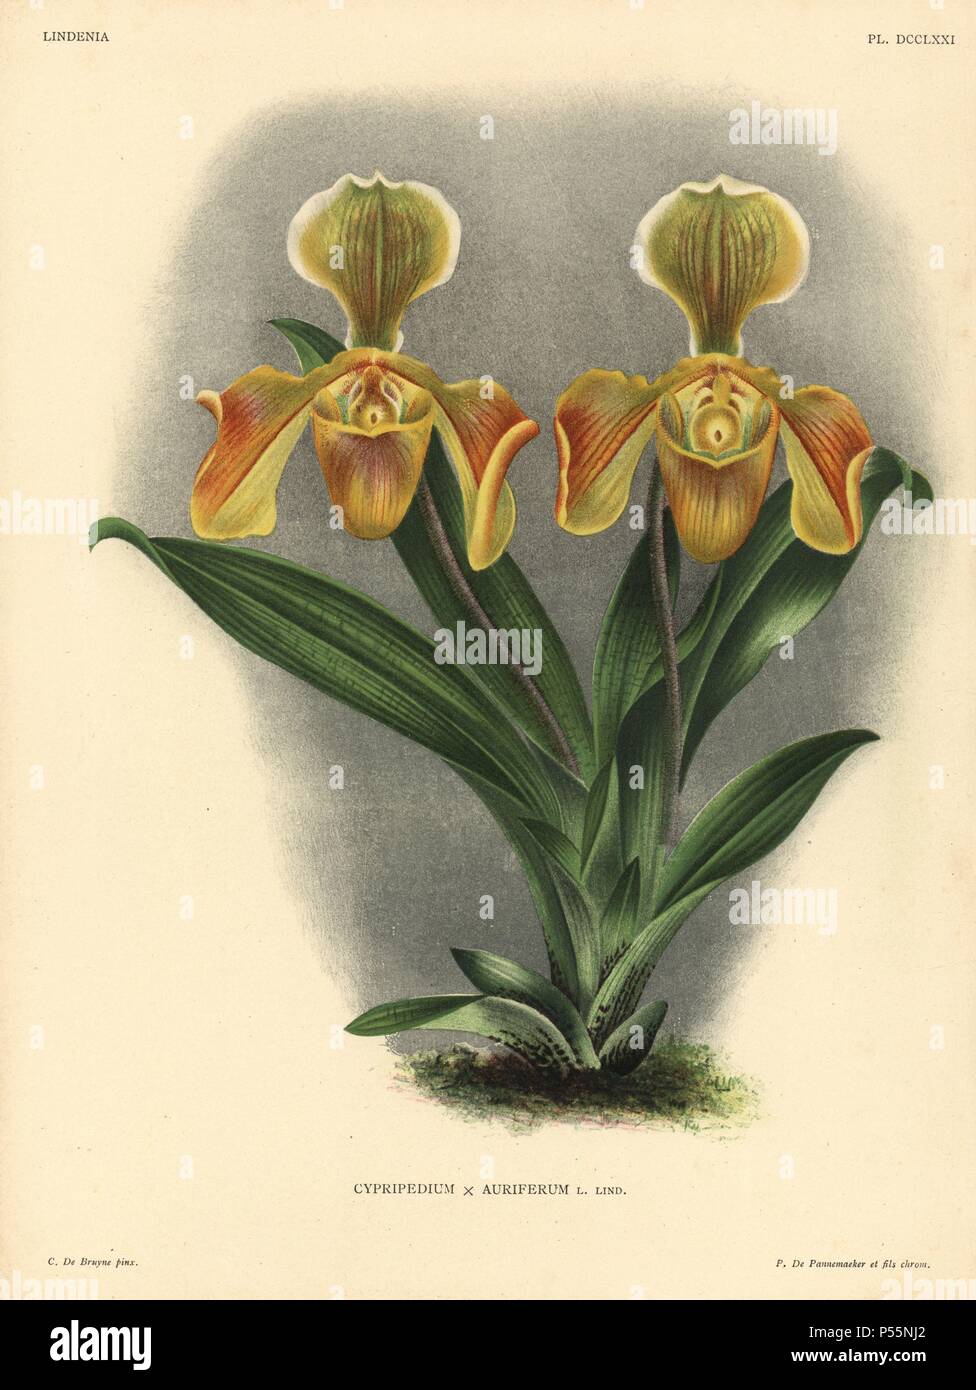 Cypripedium x Auriferum L. Lind. hybrid orchid. Illustration drawn by C. de Bruyne and chromolithographed by P. de Pannemaeker et fils from Lucien Linden's 'Lindenia, Iconographie des Orchidees,' Brussels, 1902. Stock Photo